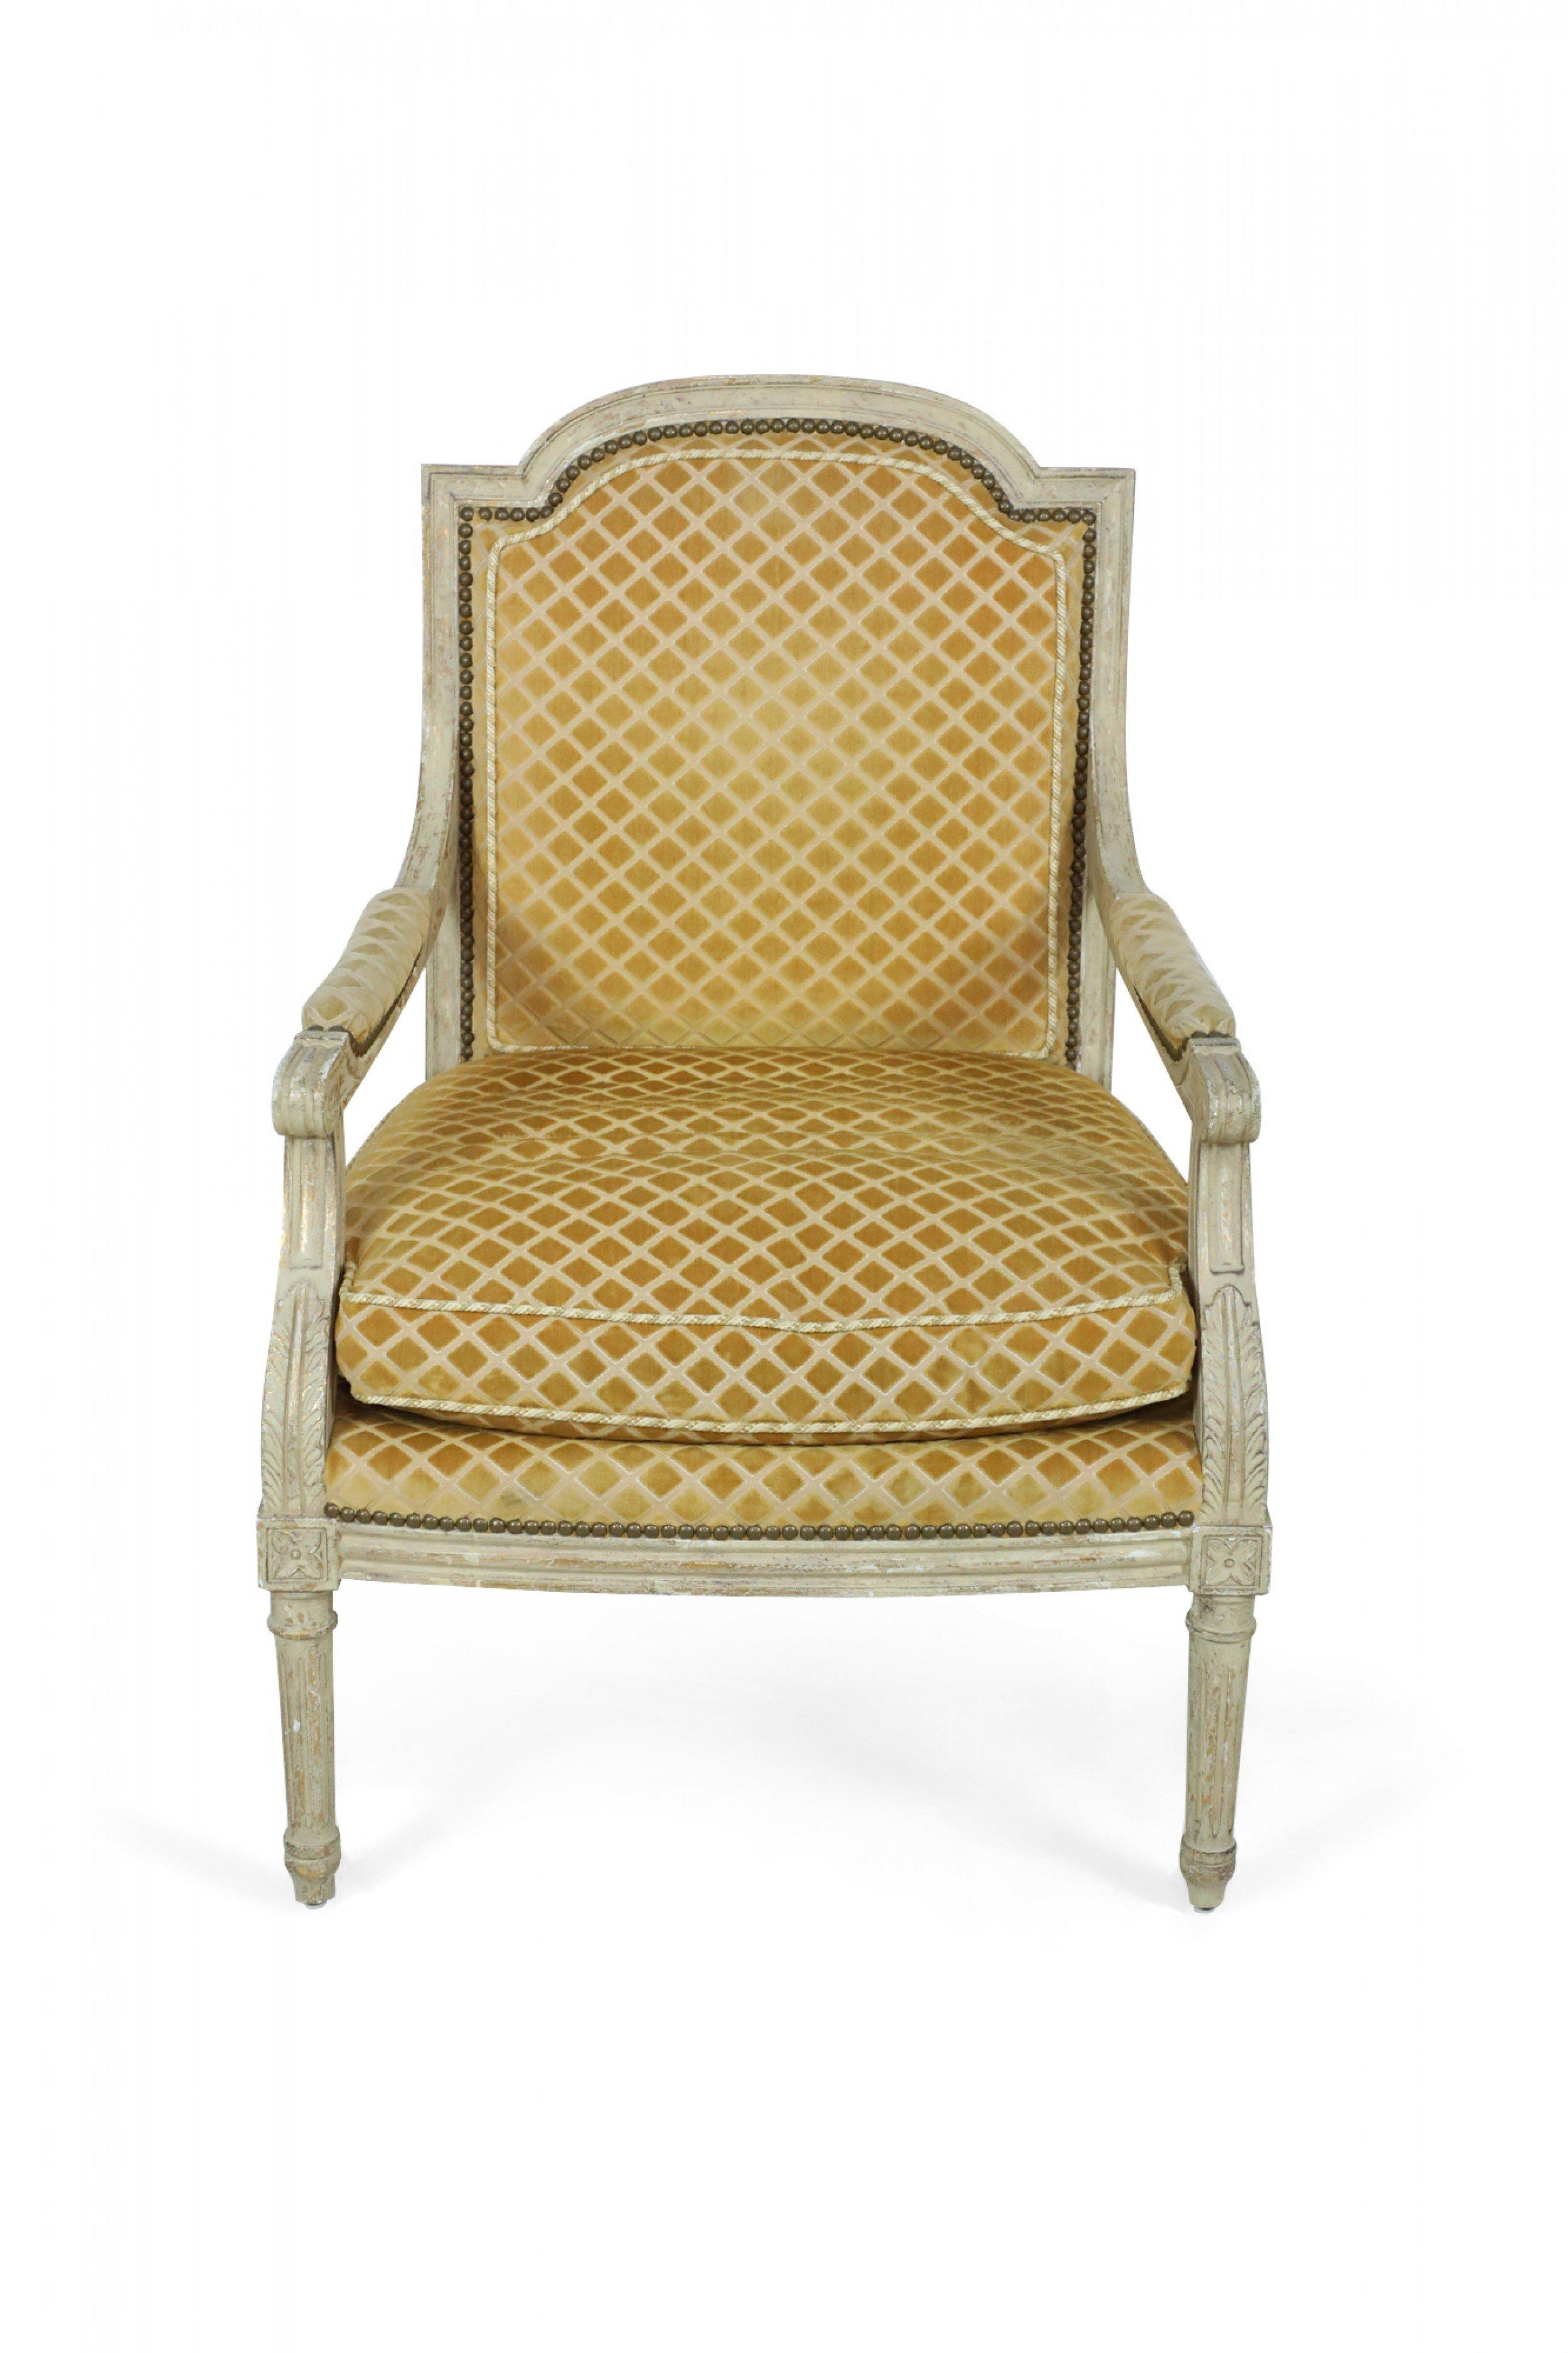 Pair of Louis XVI-Style Gold Upholstered Fauteuils / Armchairs For Sale 6